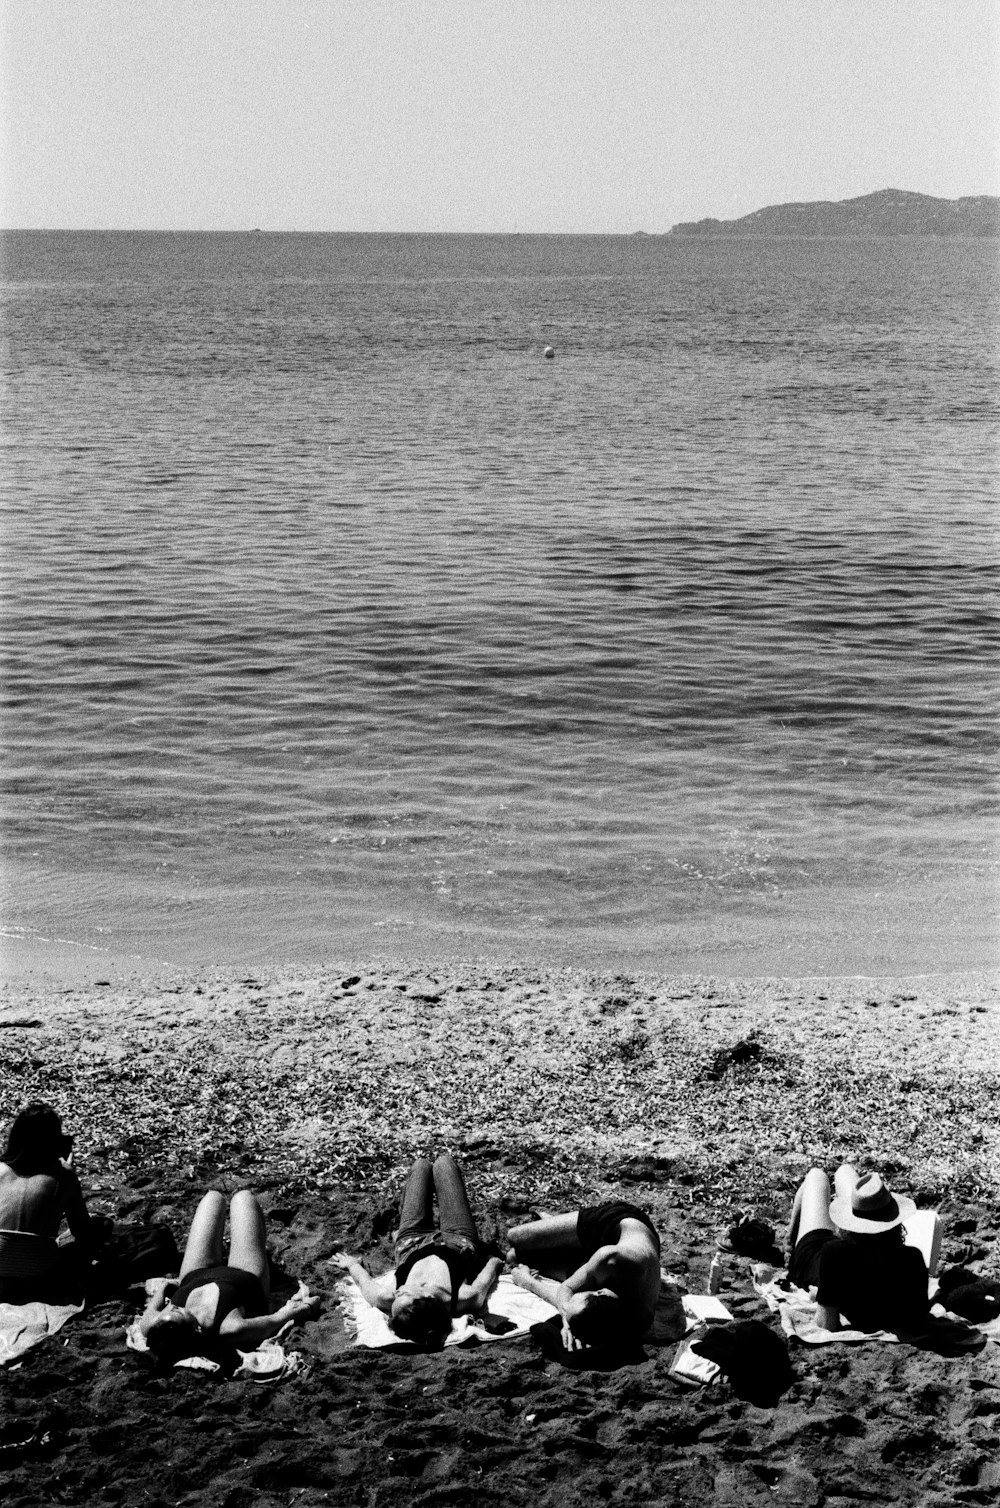 grayscale photo of people sitting on beach shore